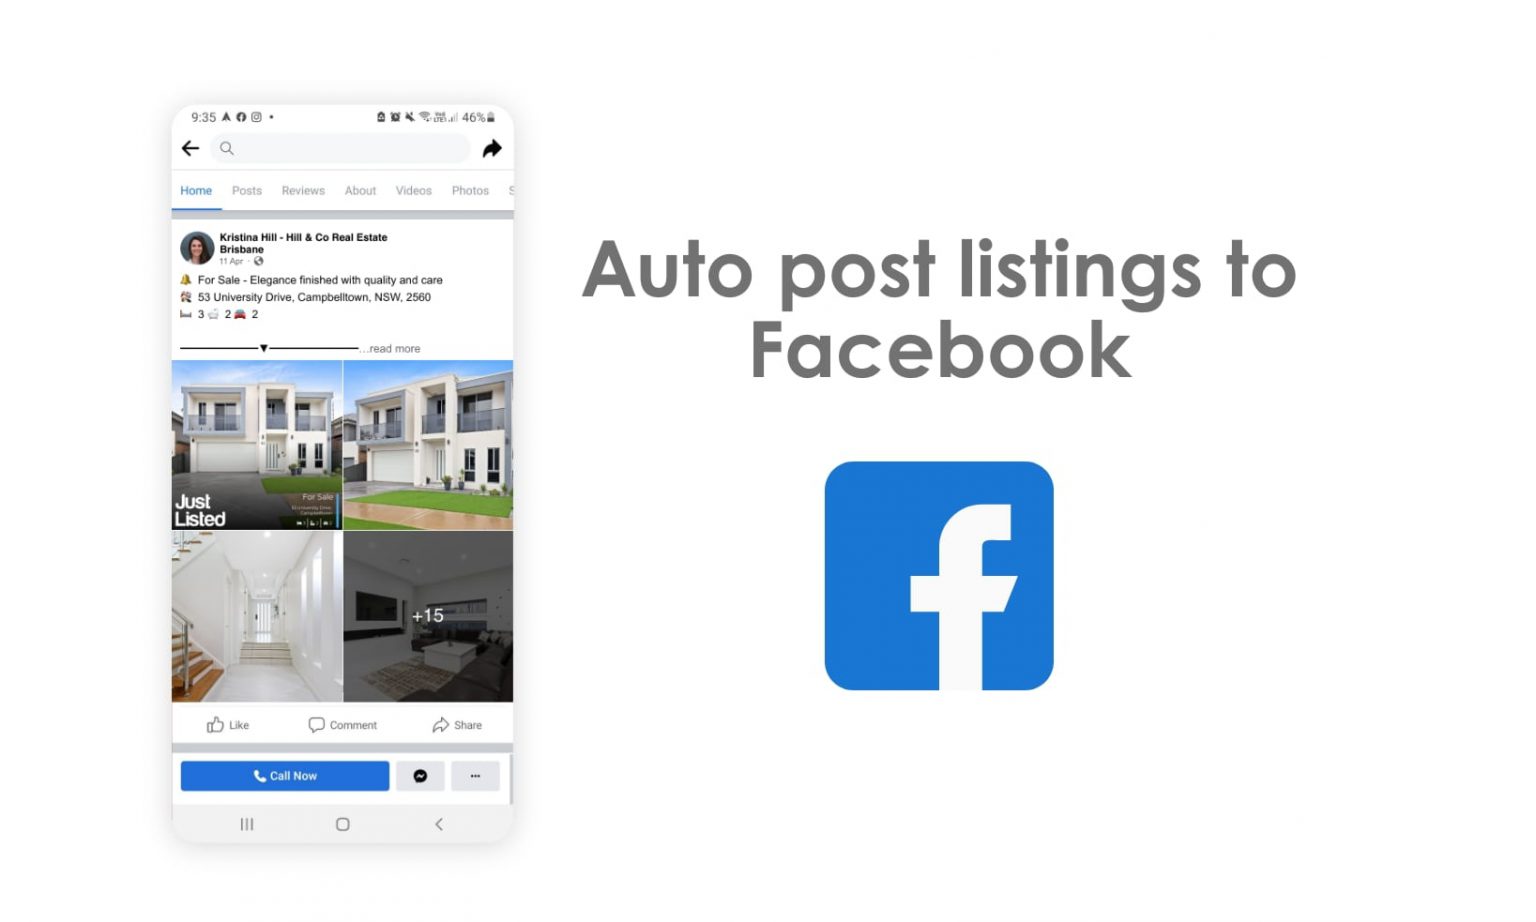 Automatic posting of real estate listings to Facebook